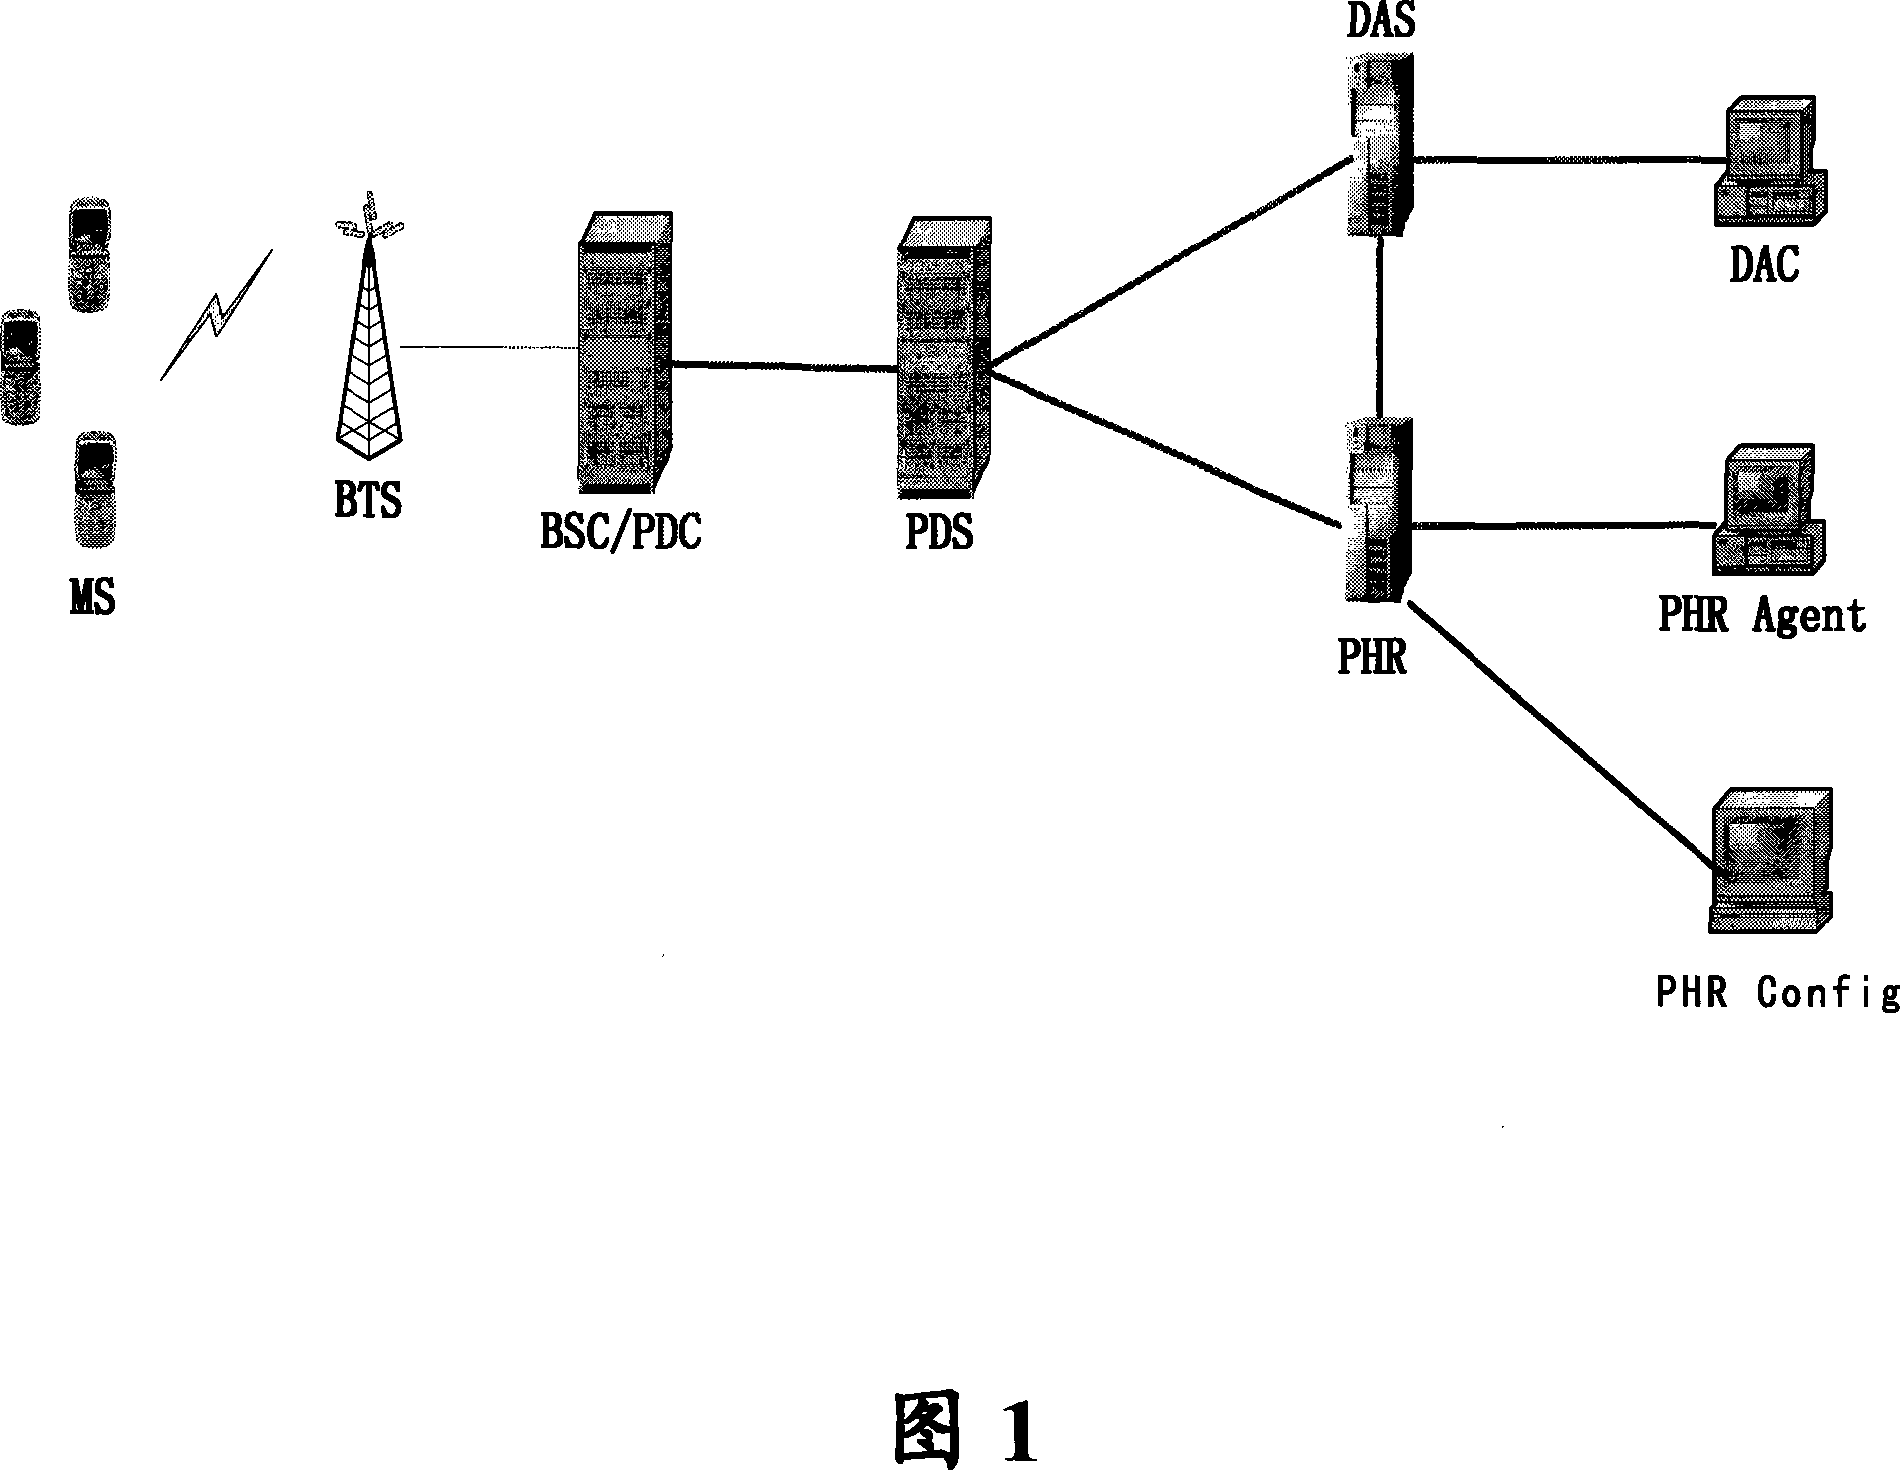 Group calling call mode automatically optimized method used for CDMA digital cluster system